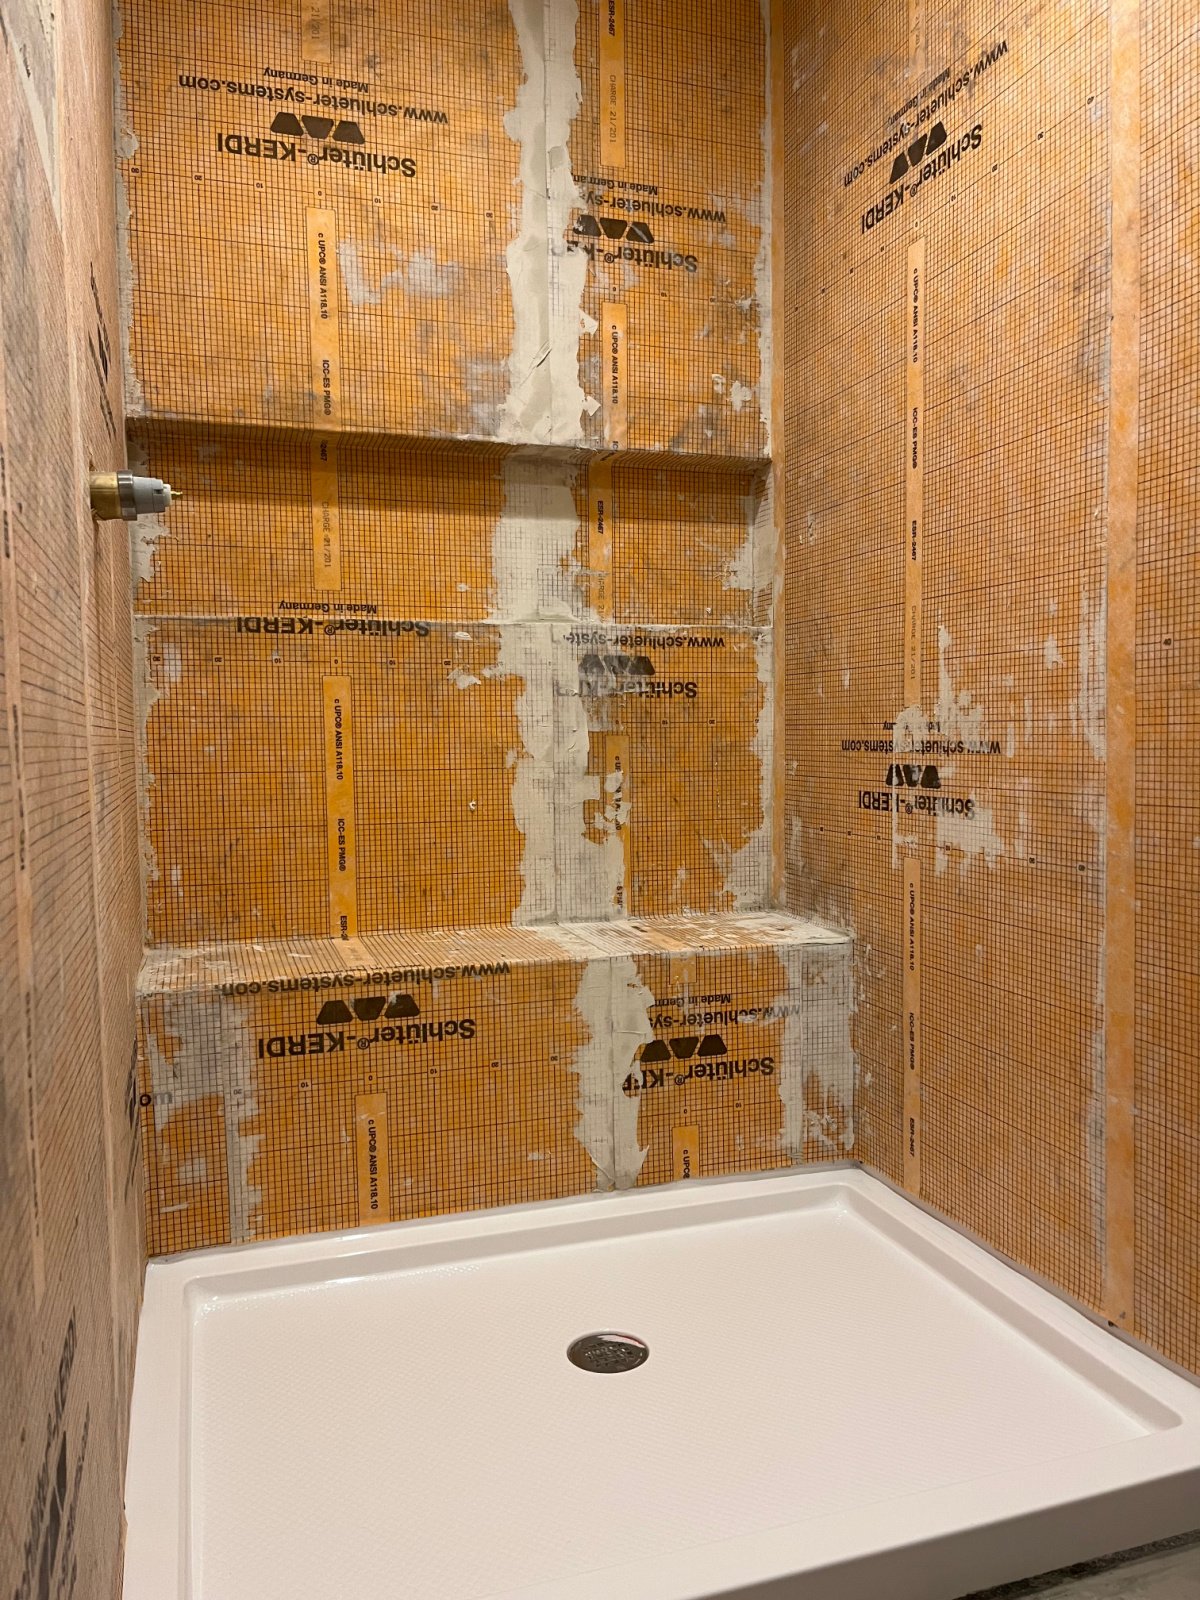 How to Convert a Tub To a Walk-In Shower: A DIY Guide